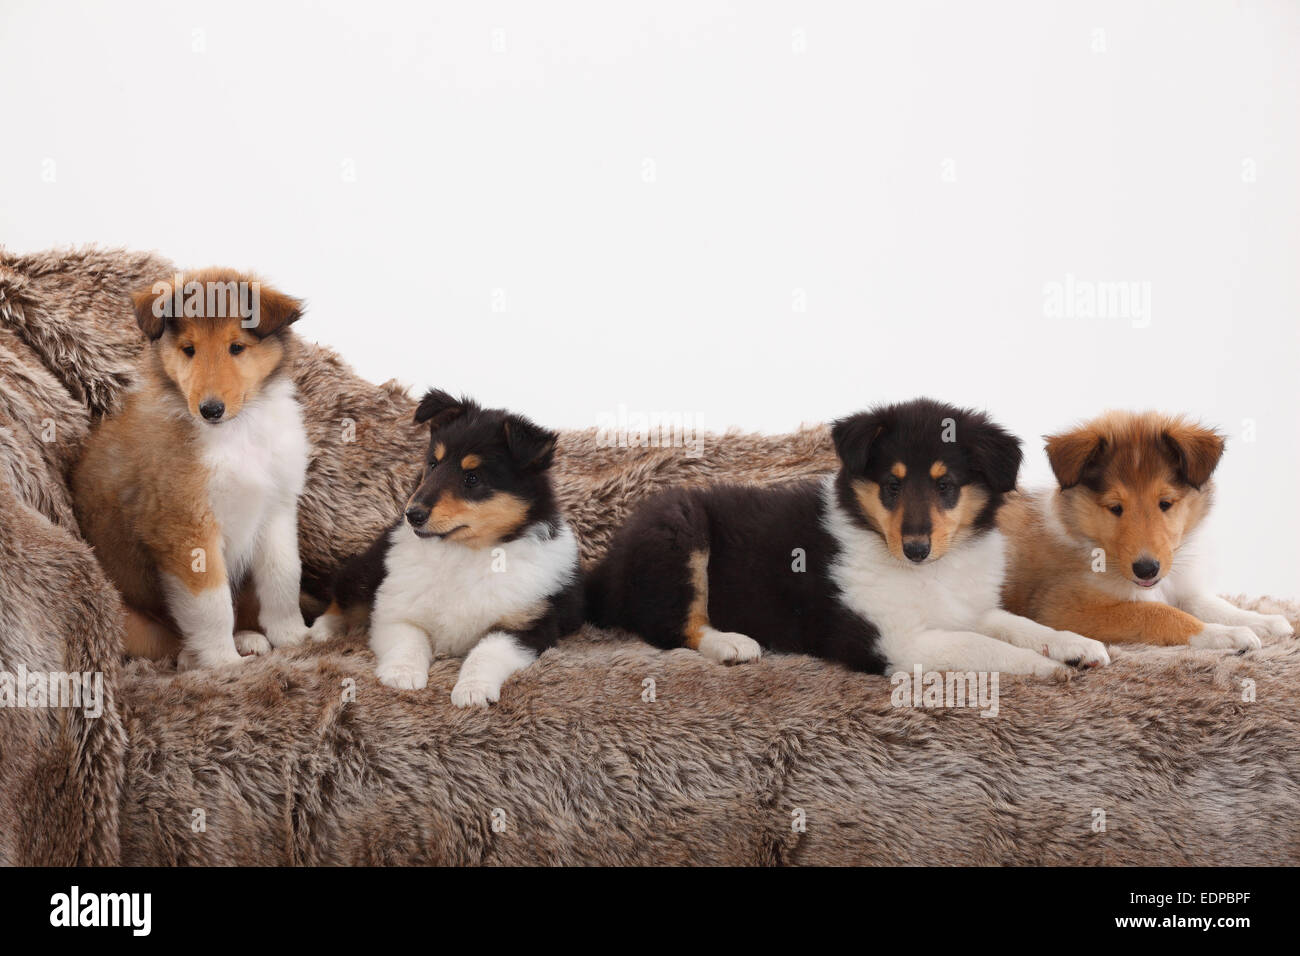 Rough Collie Puppies High Resolution Stock Photography and Images - Alamy